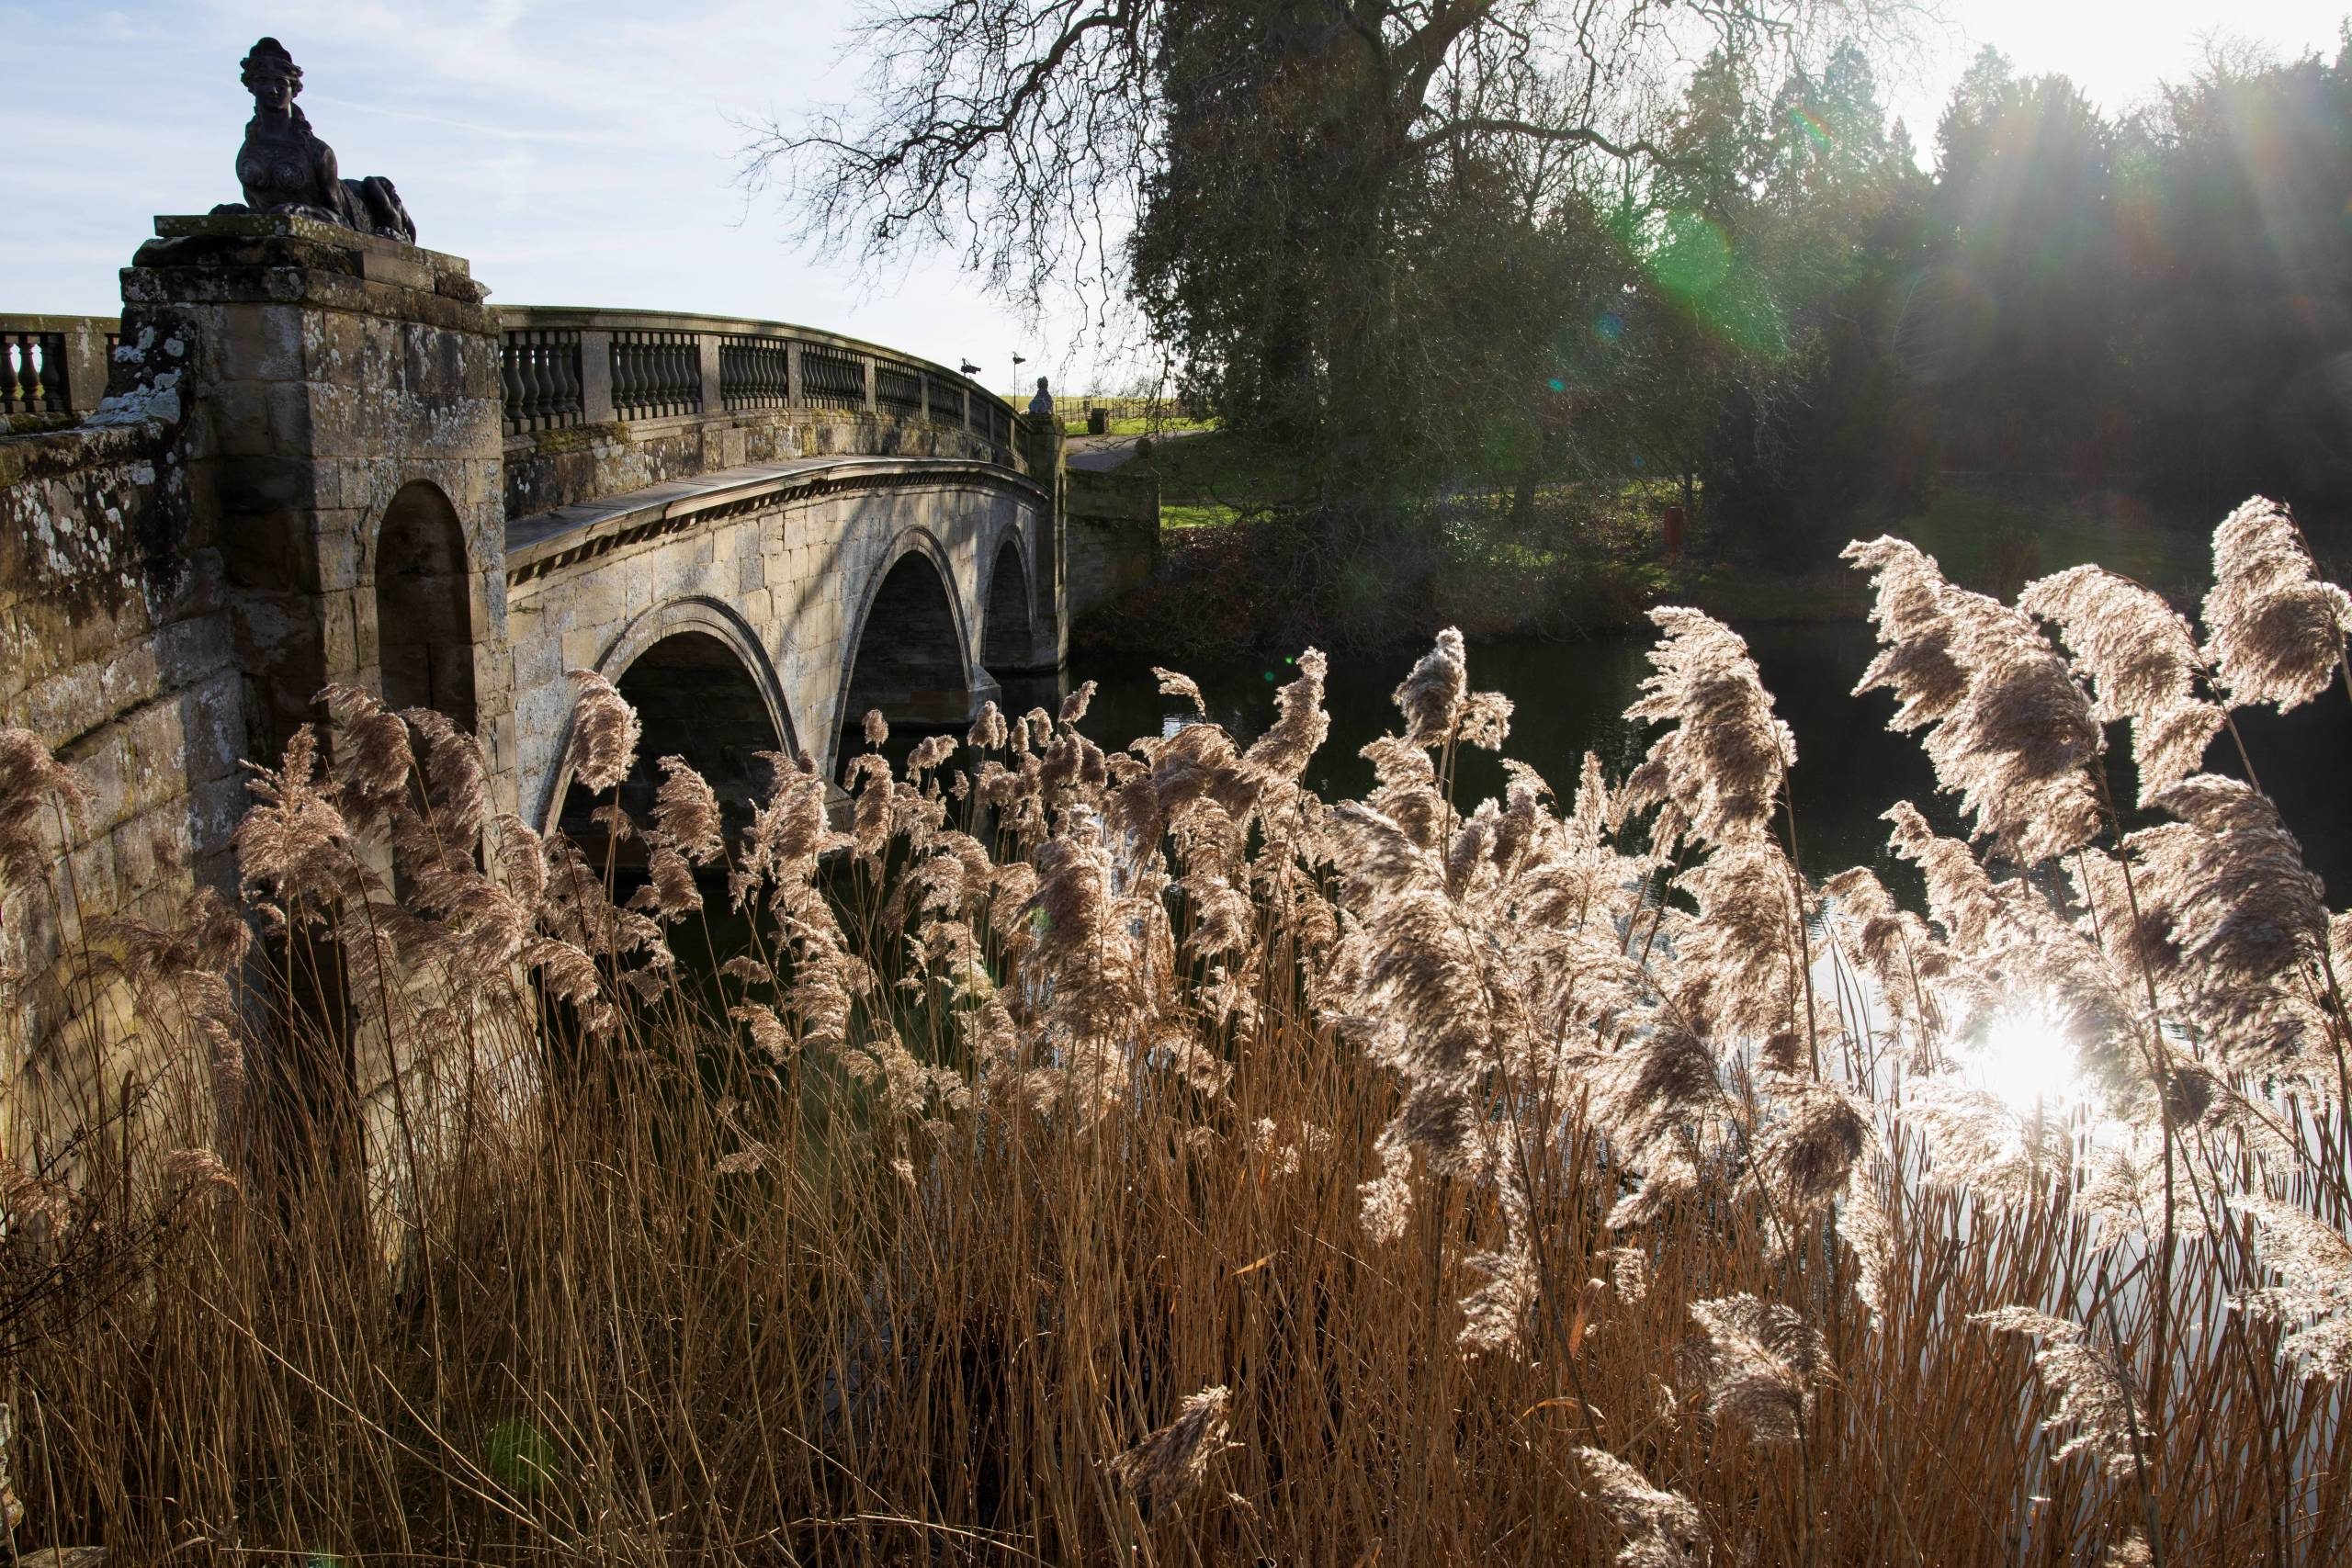 An historic stone bridge with sphynx statues over a lake surrounded by pampas grass